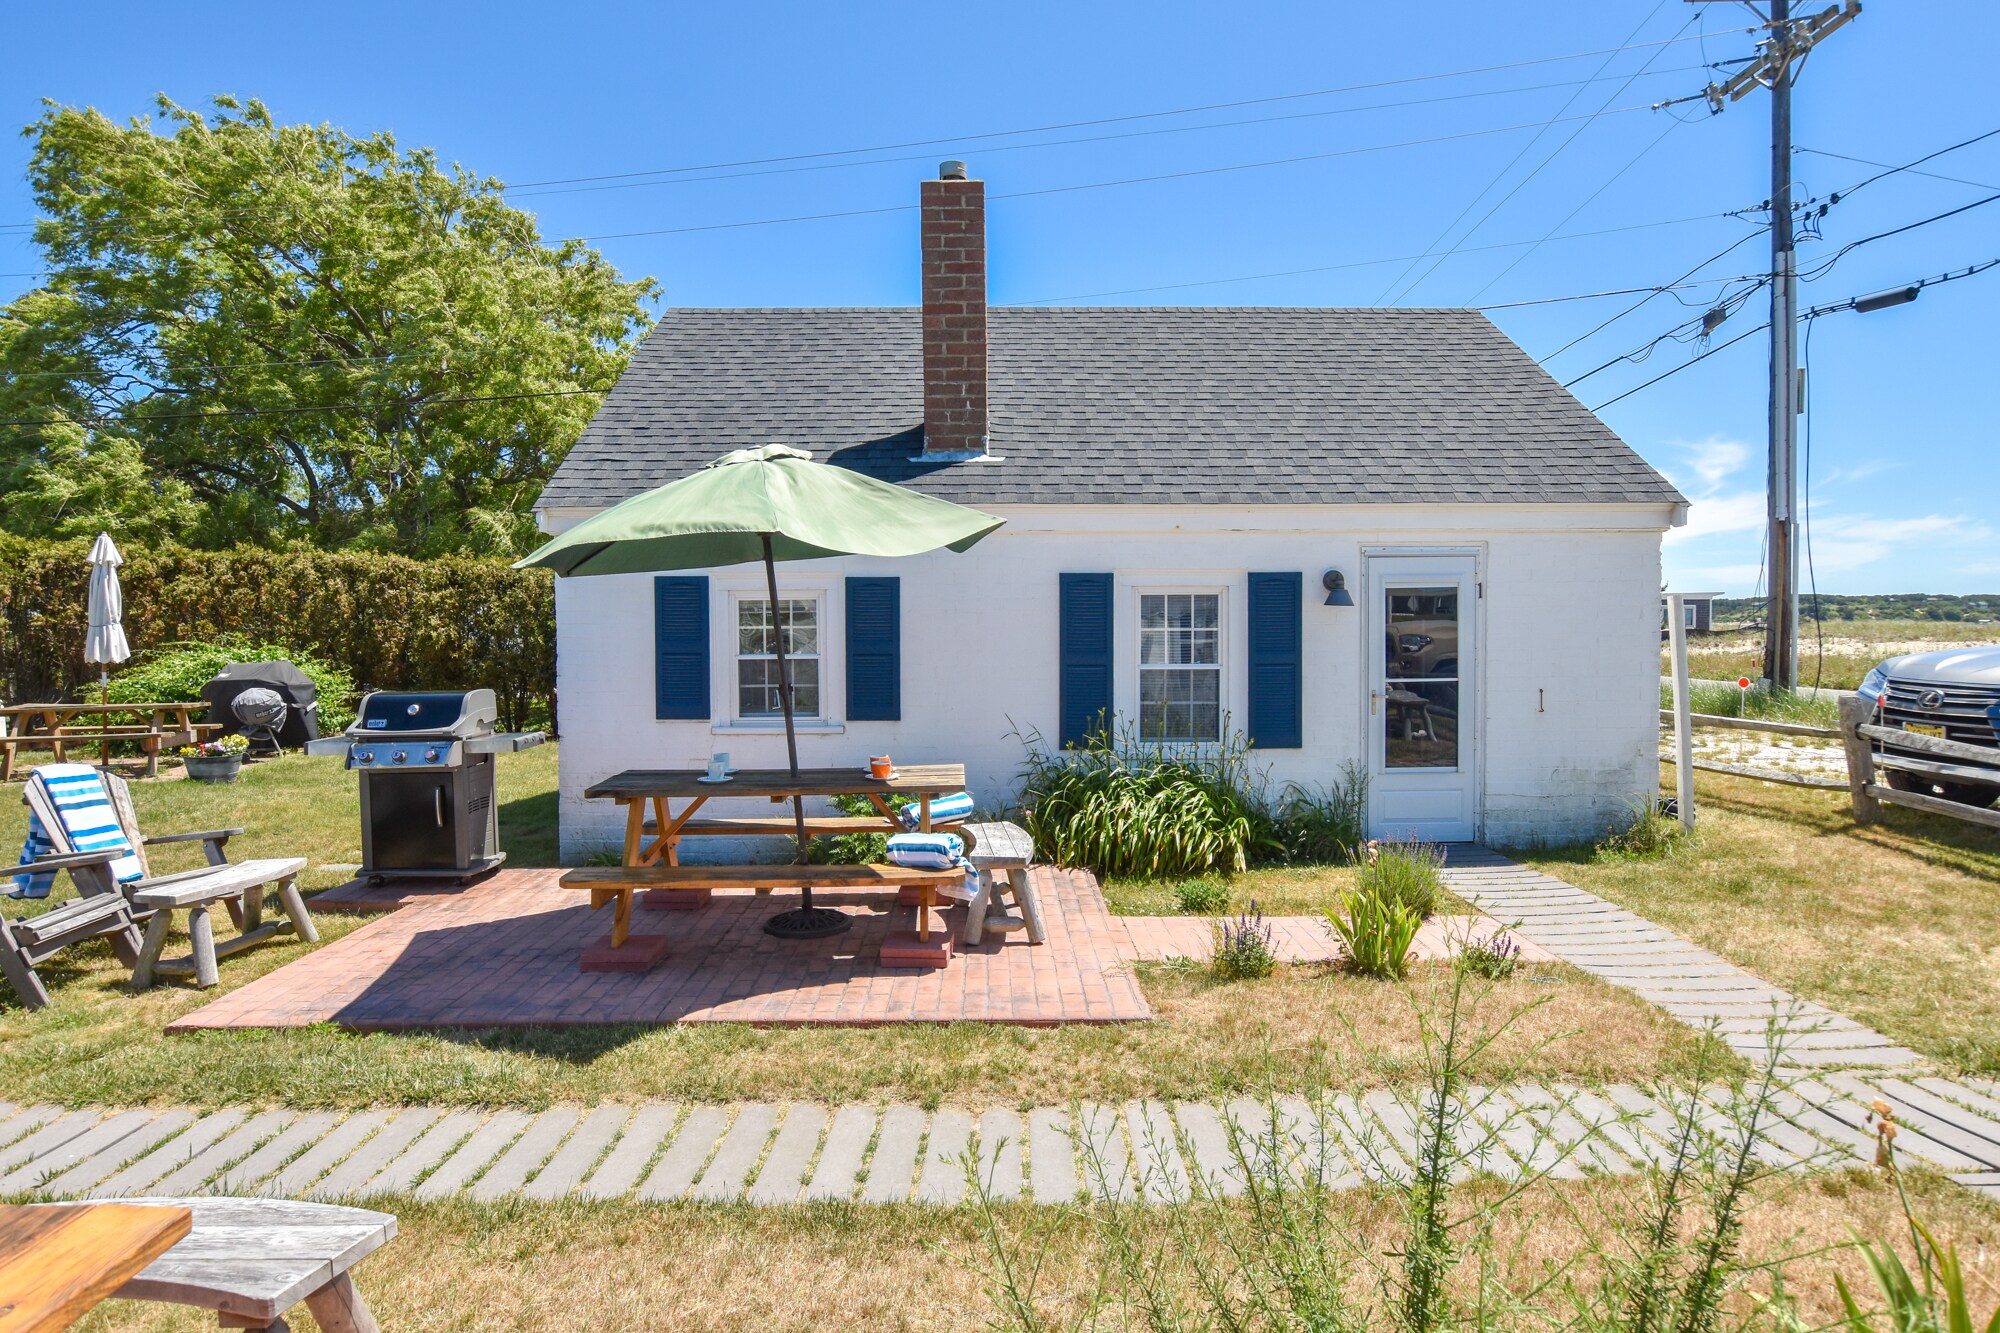 Property Image 2 - 13304: Beachy keen cottage! Across from Mayo Beach, and short walk to downtown!